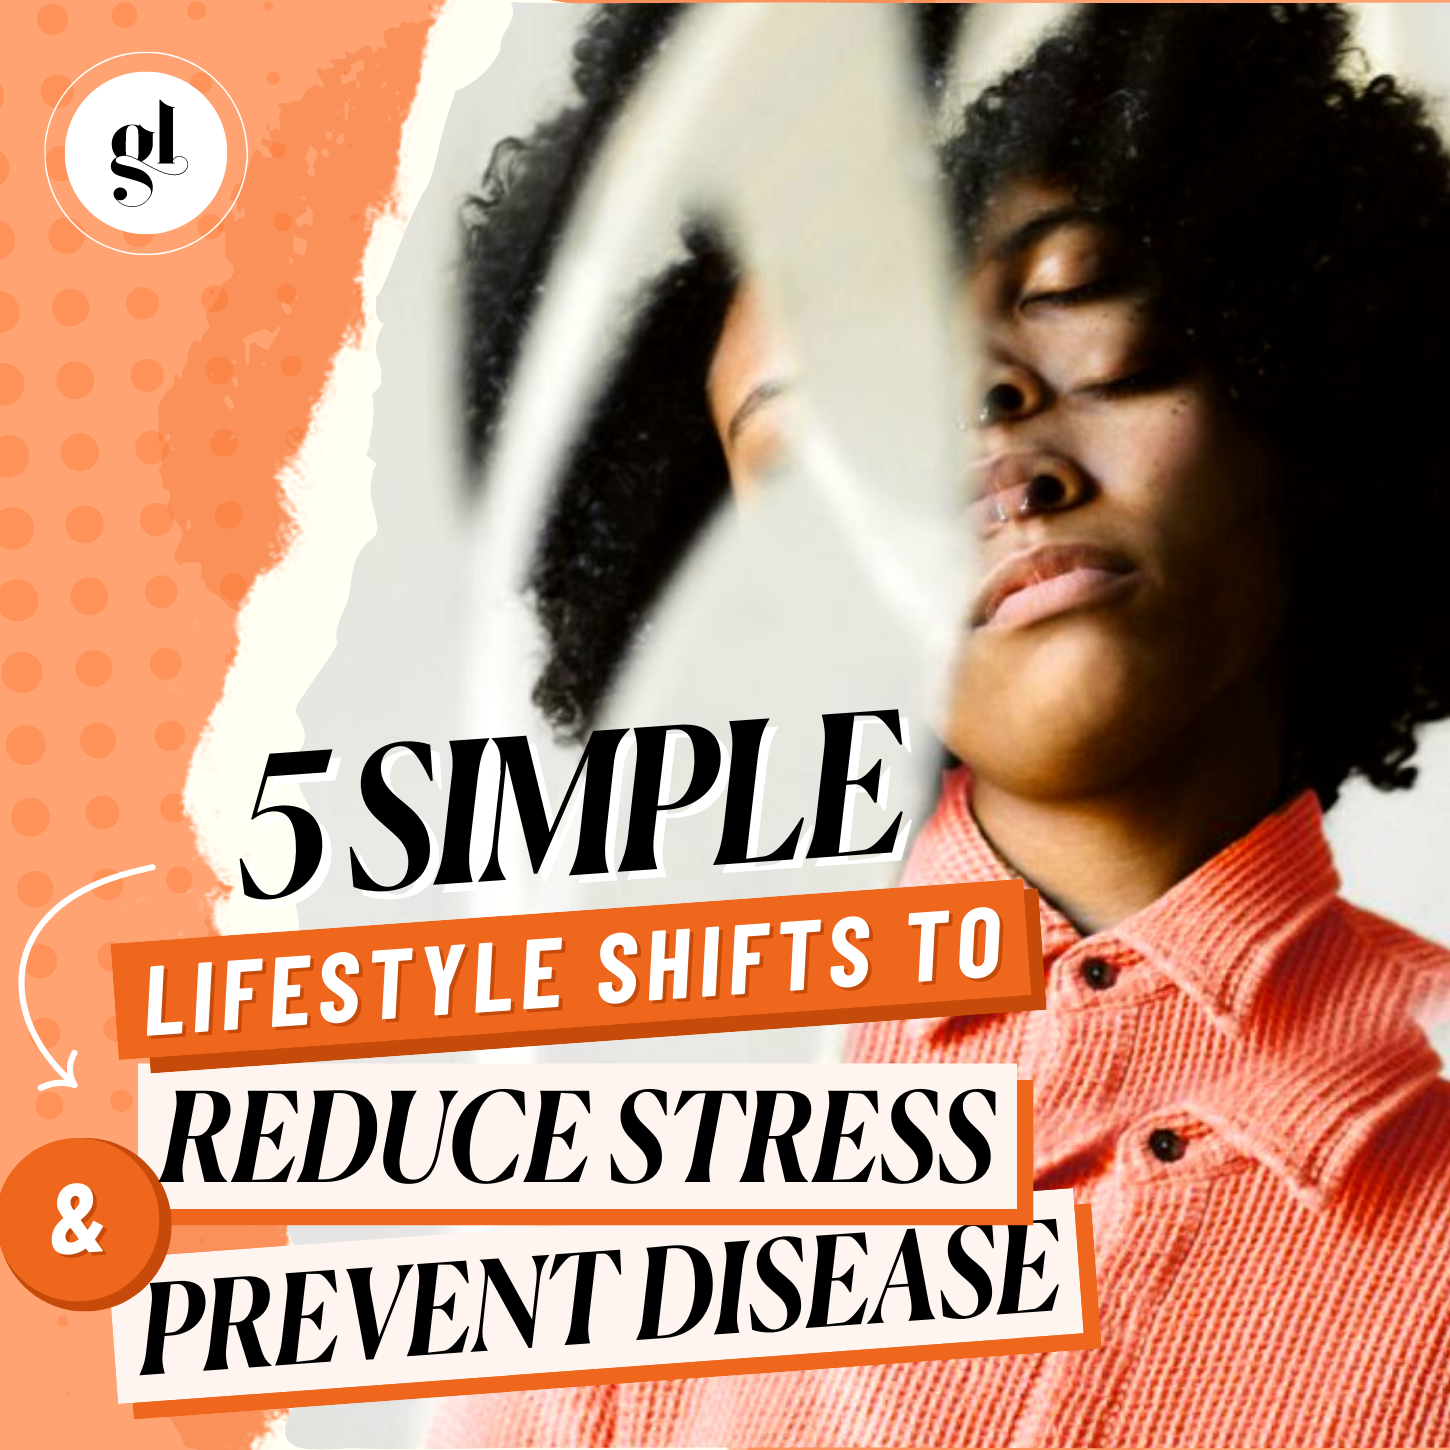 5 Simple Lifestyle Shifts to Reduce Stress and Prevent Disease